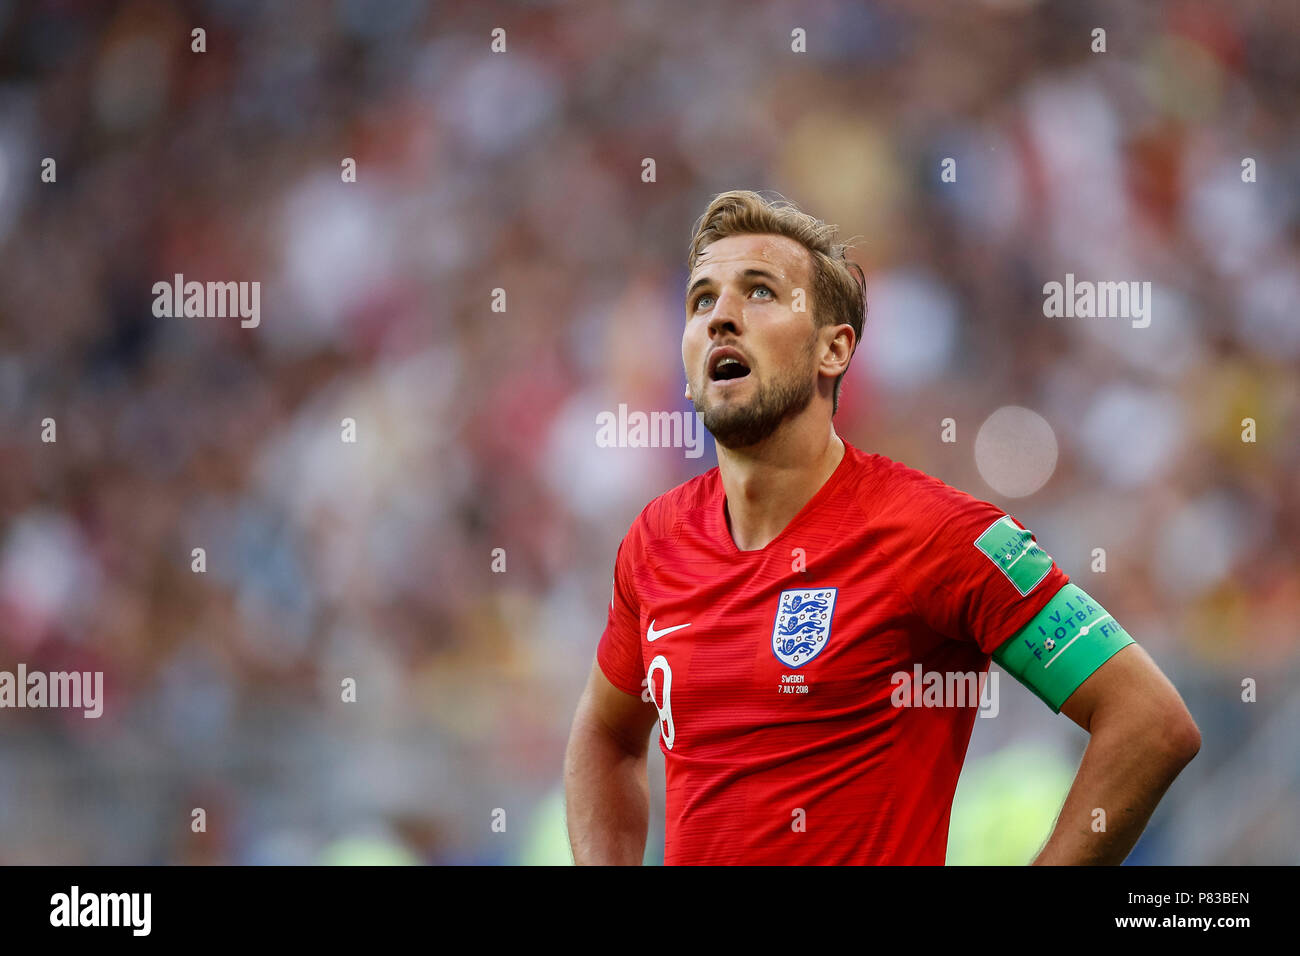 Samara, Russia. 7th July, 2018. Harry Kane of England during the 2018 FIFA World Cup Quarter Final match between Sweden and England at Samara Arena on July 7th 2018 in Samara, Russia. (Photo by Daniel Chesterton/phcimages.com) Credit: PHC Images/Alamy Live News Stock Photo